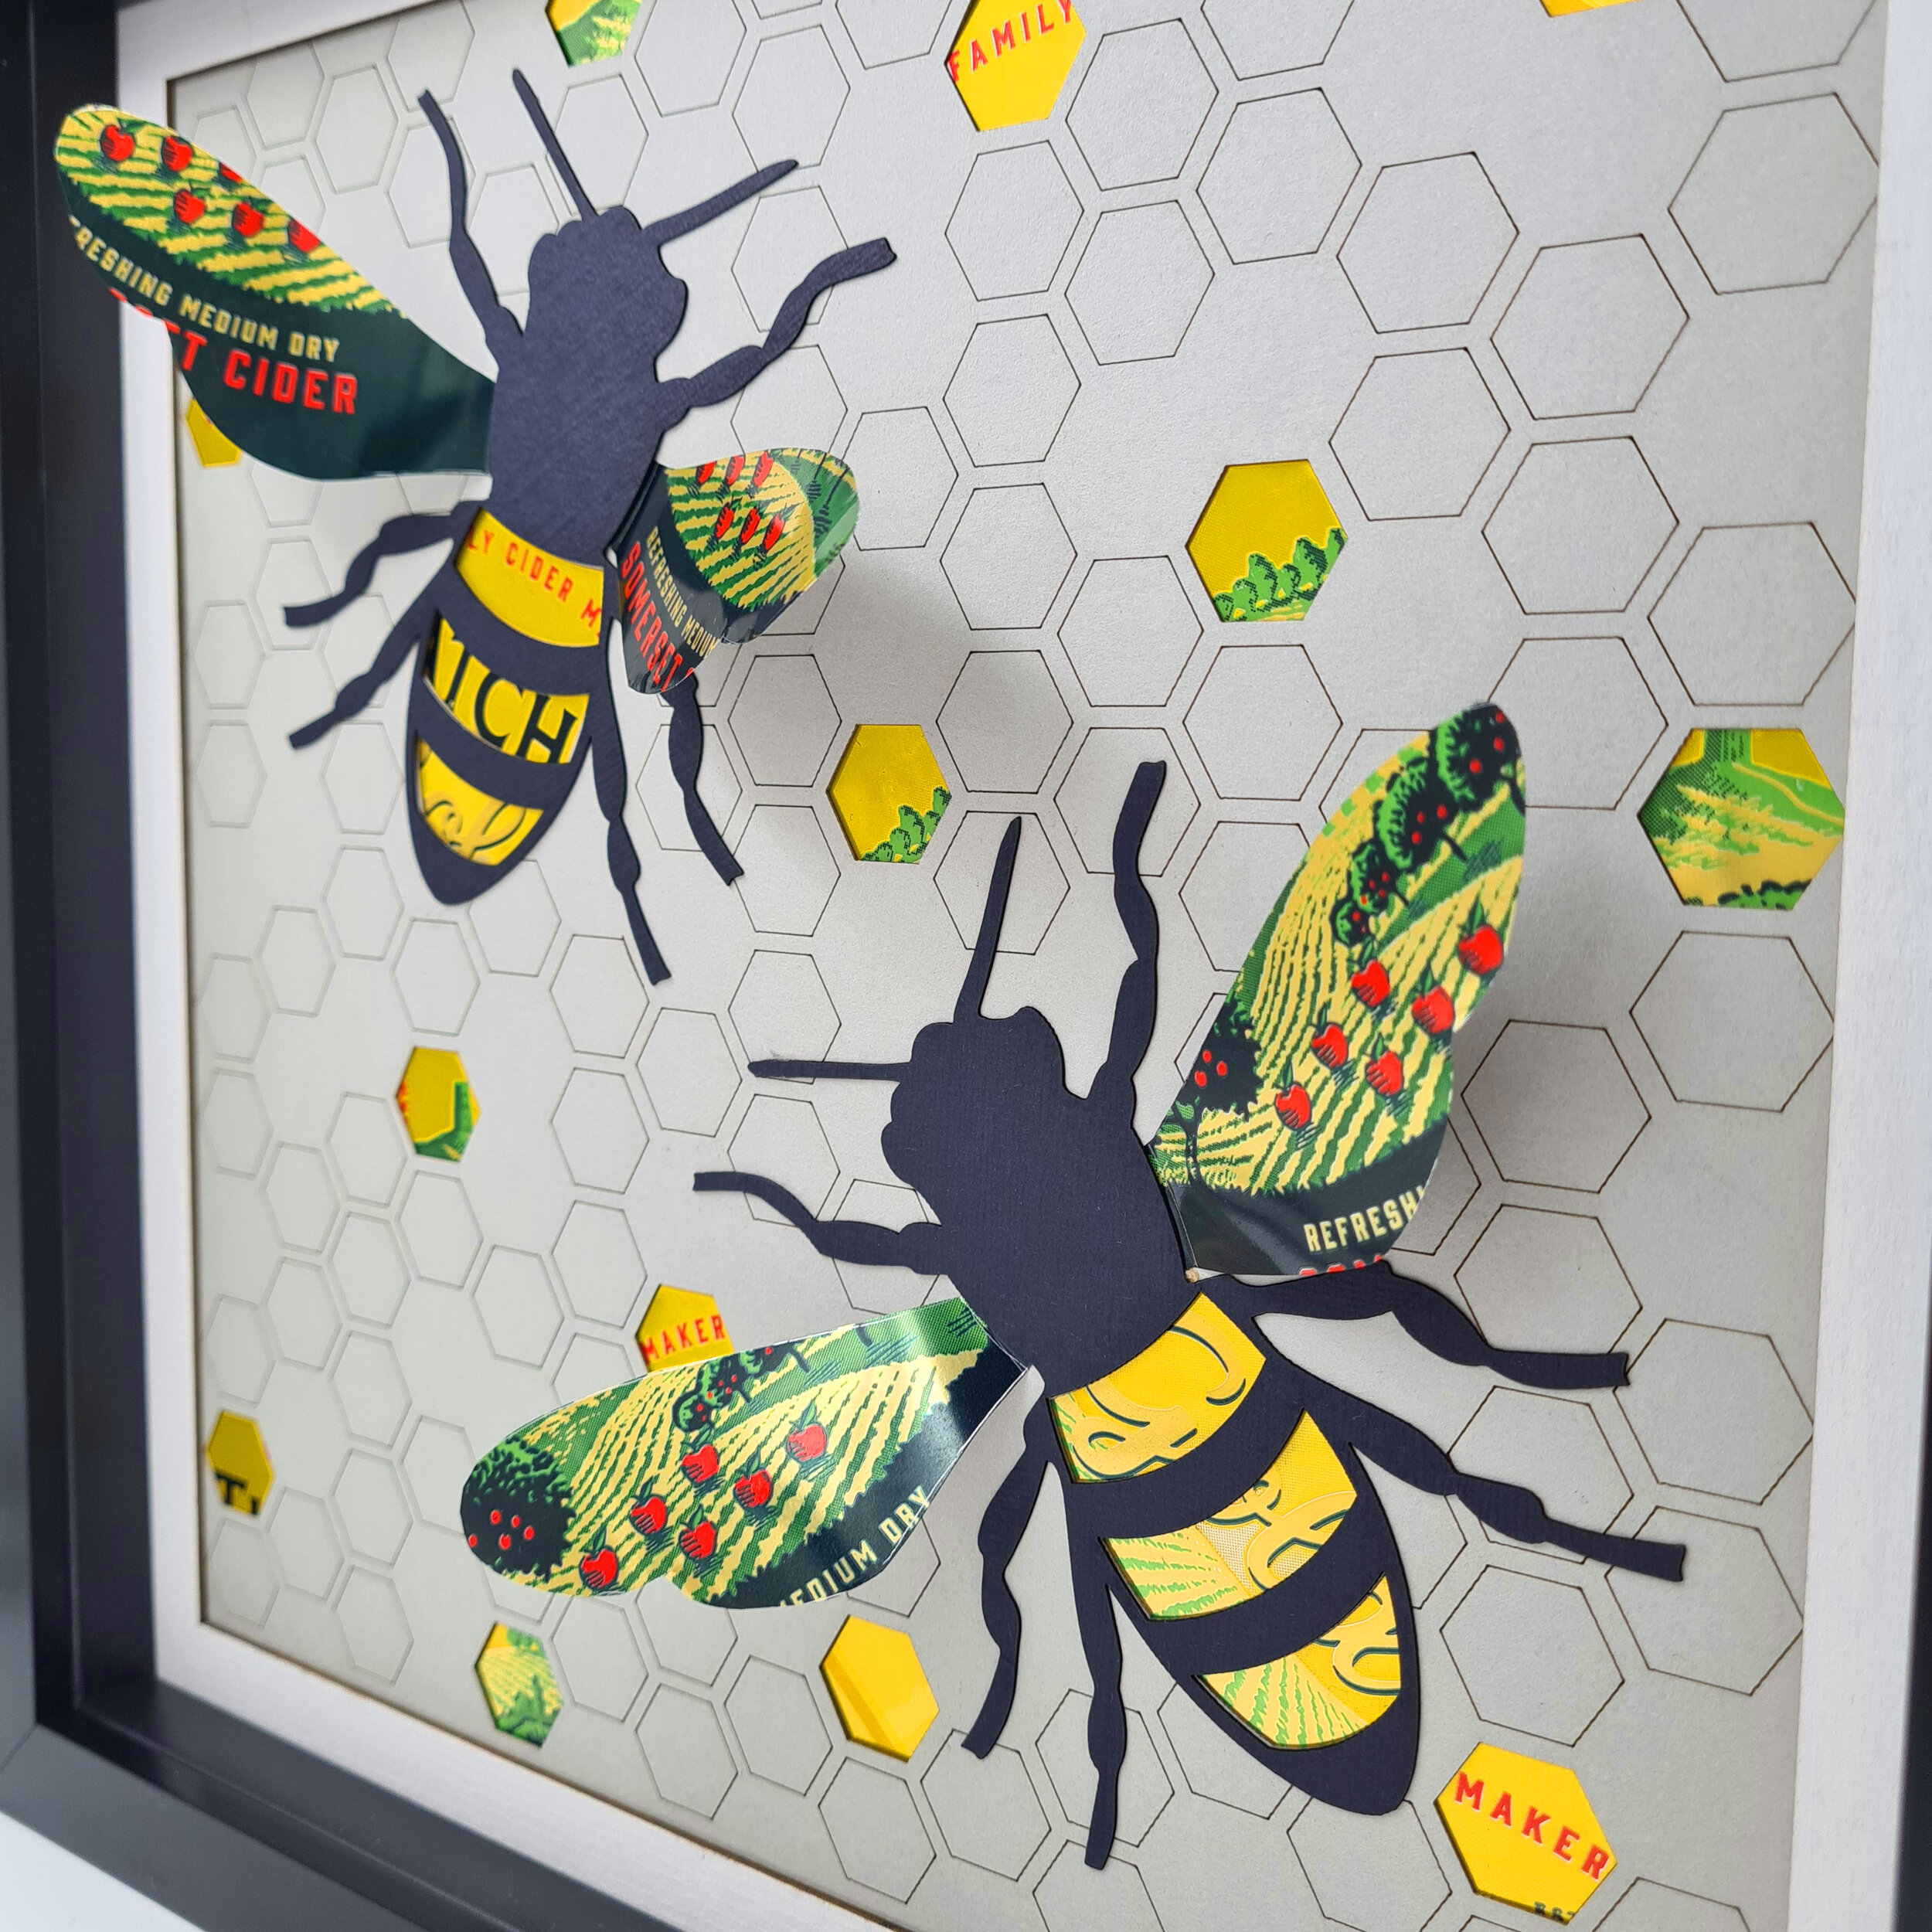 Thatchers bumble bee upcycled framed artwork